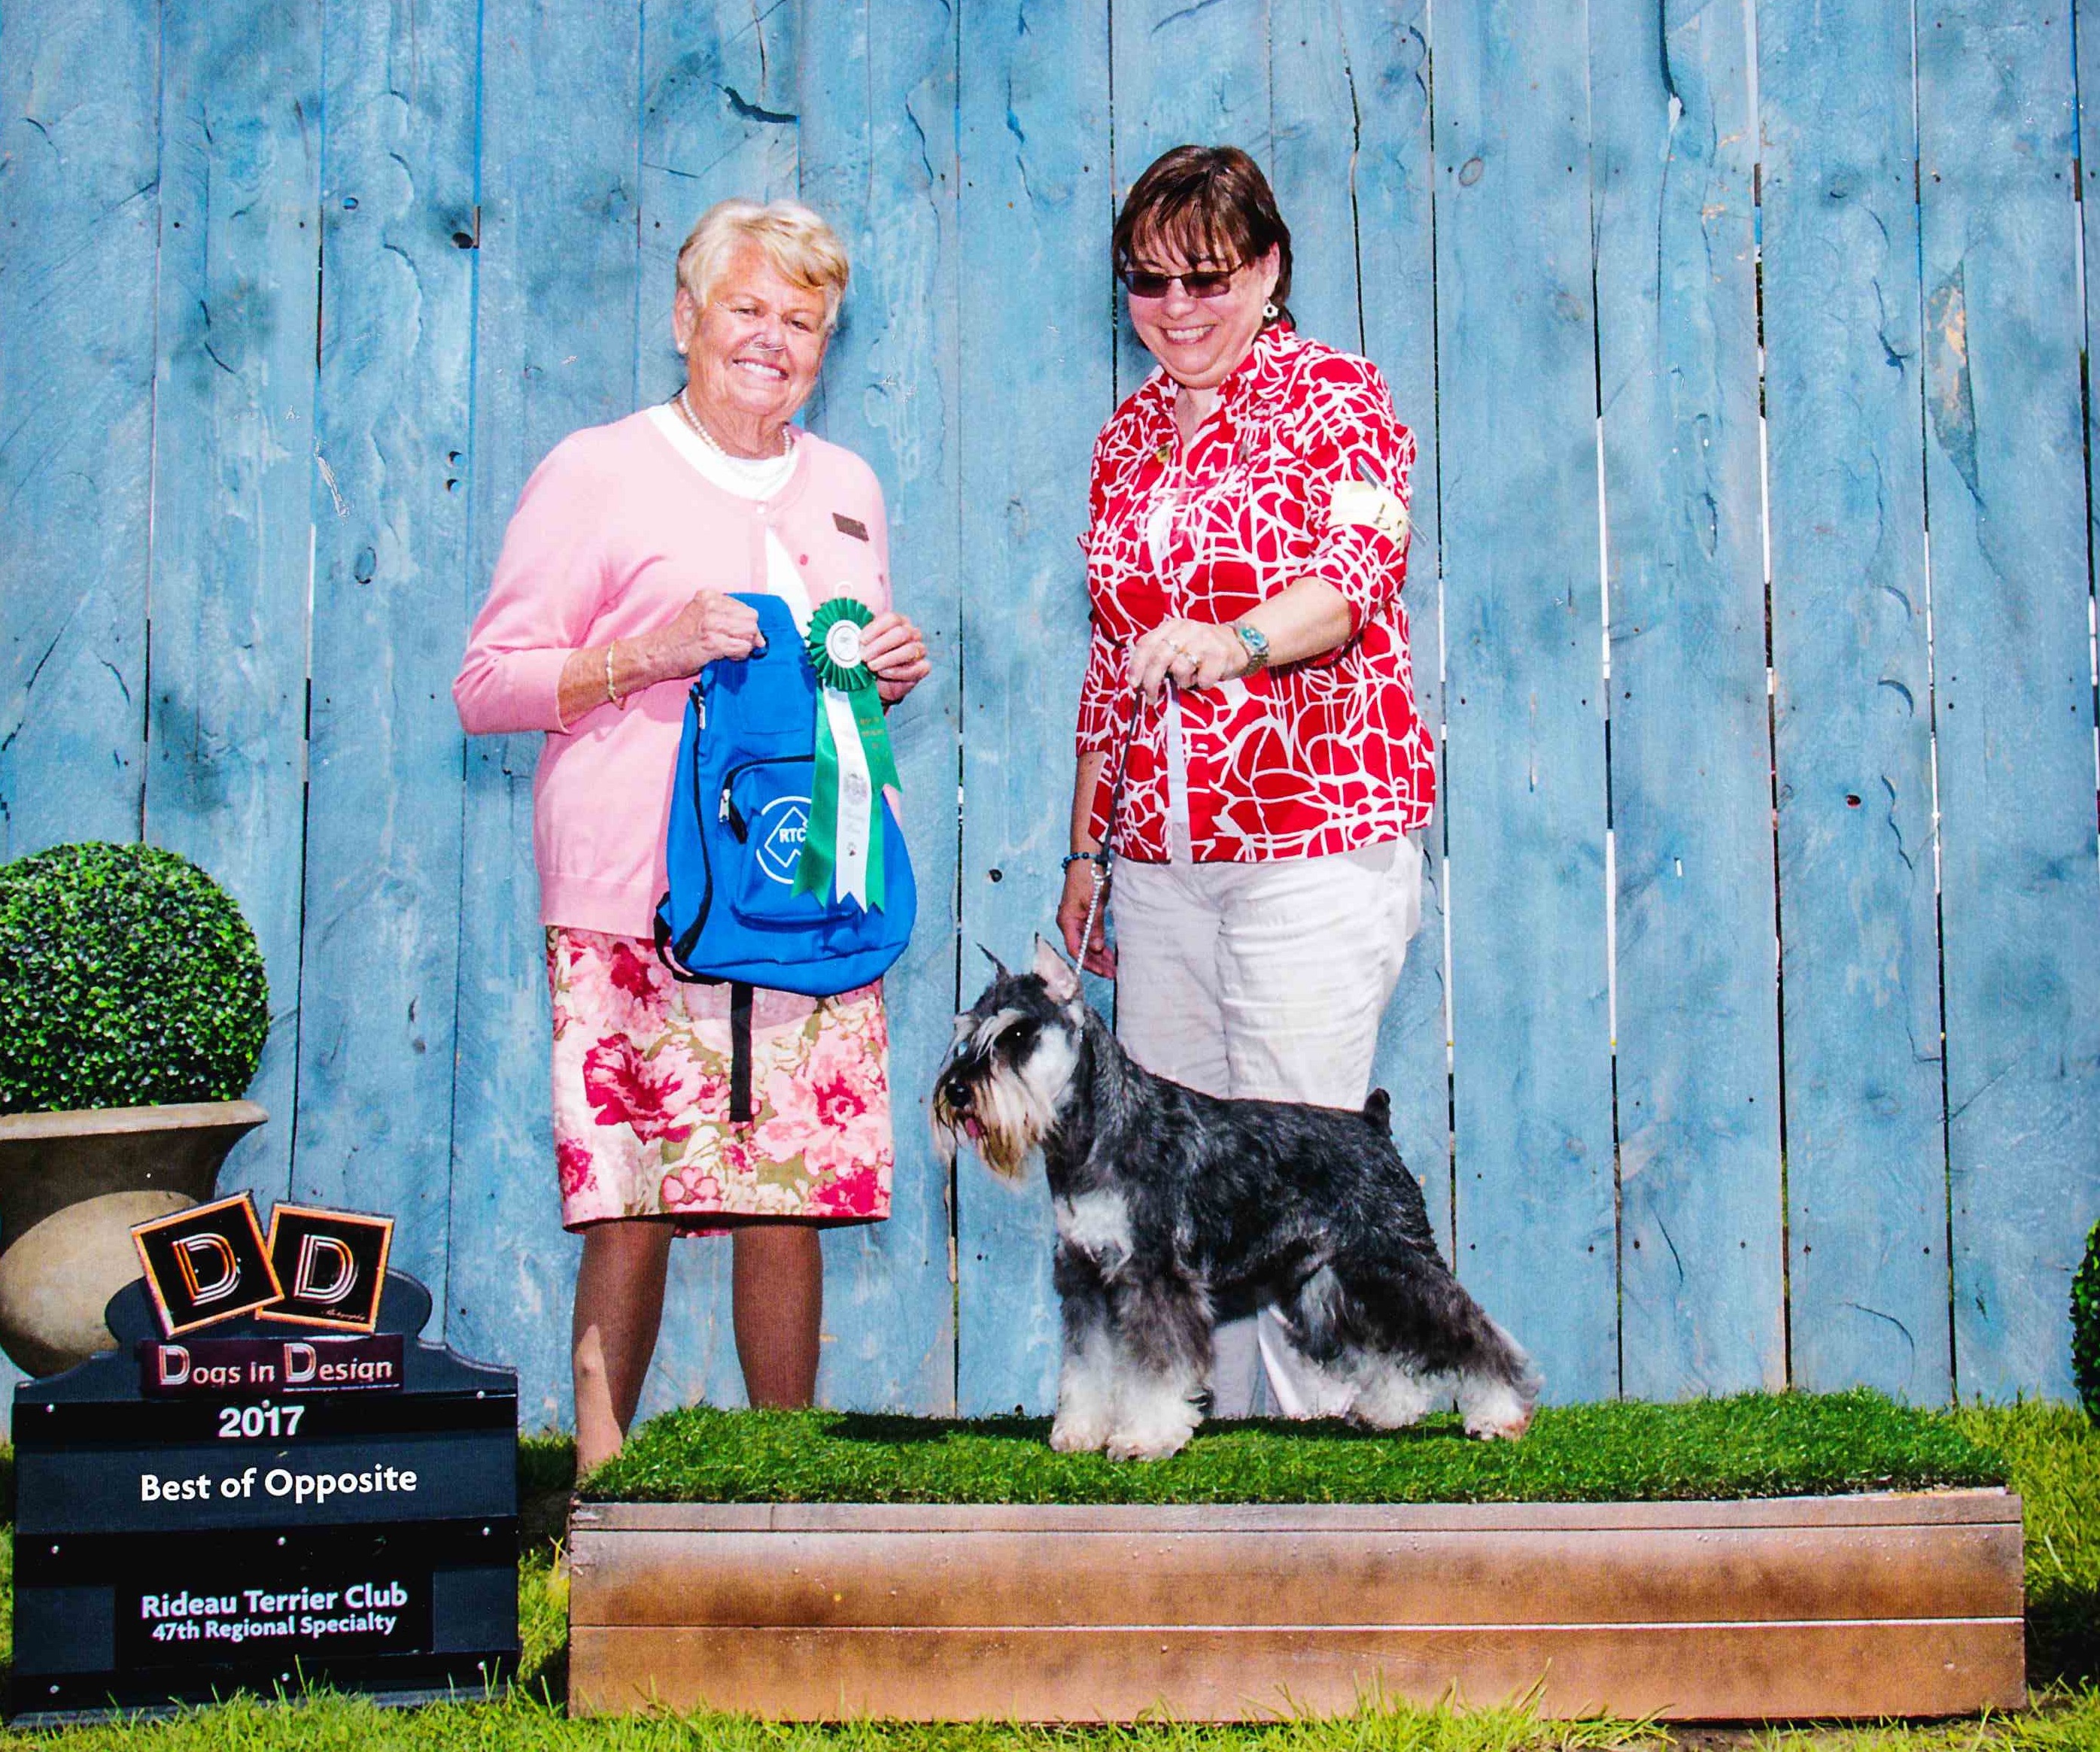 Our King wins Best of Opposite at Rideau Terrier Specialty!